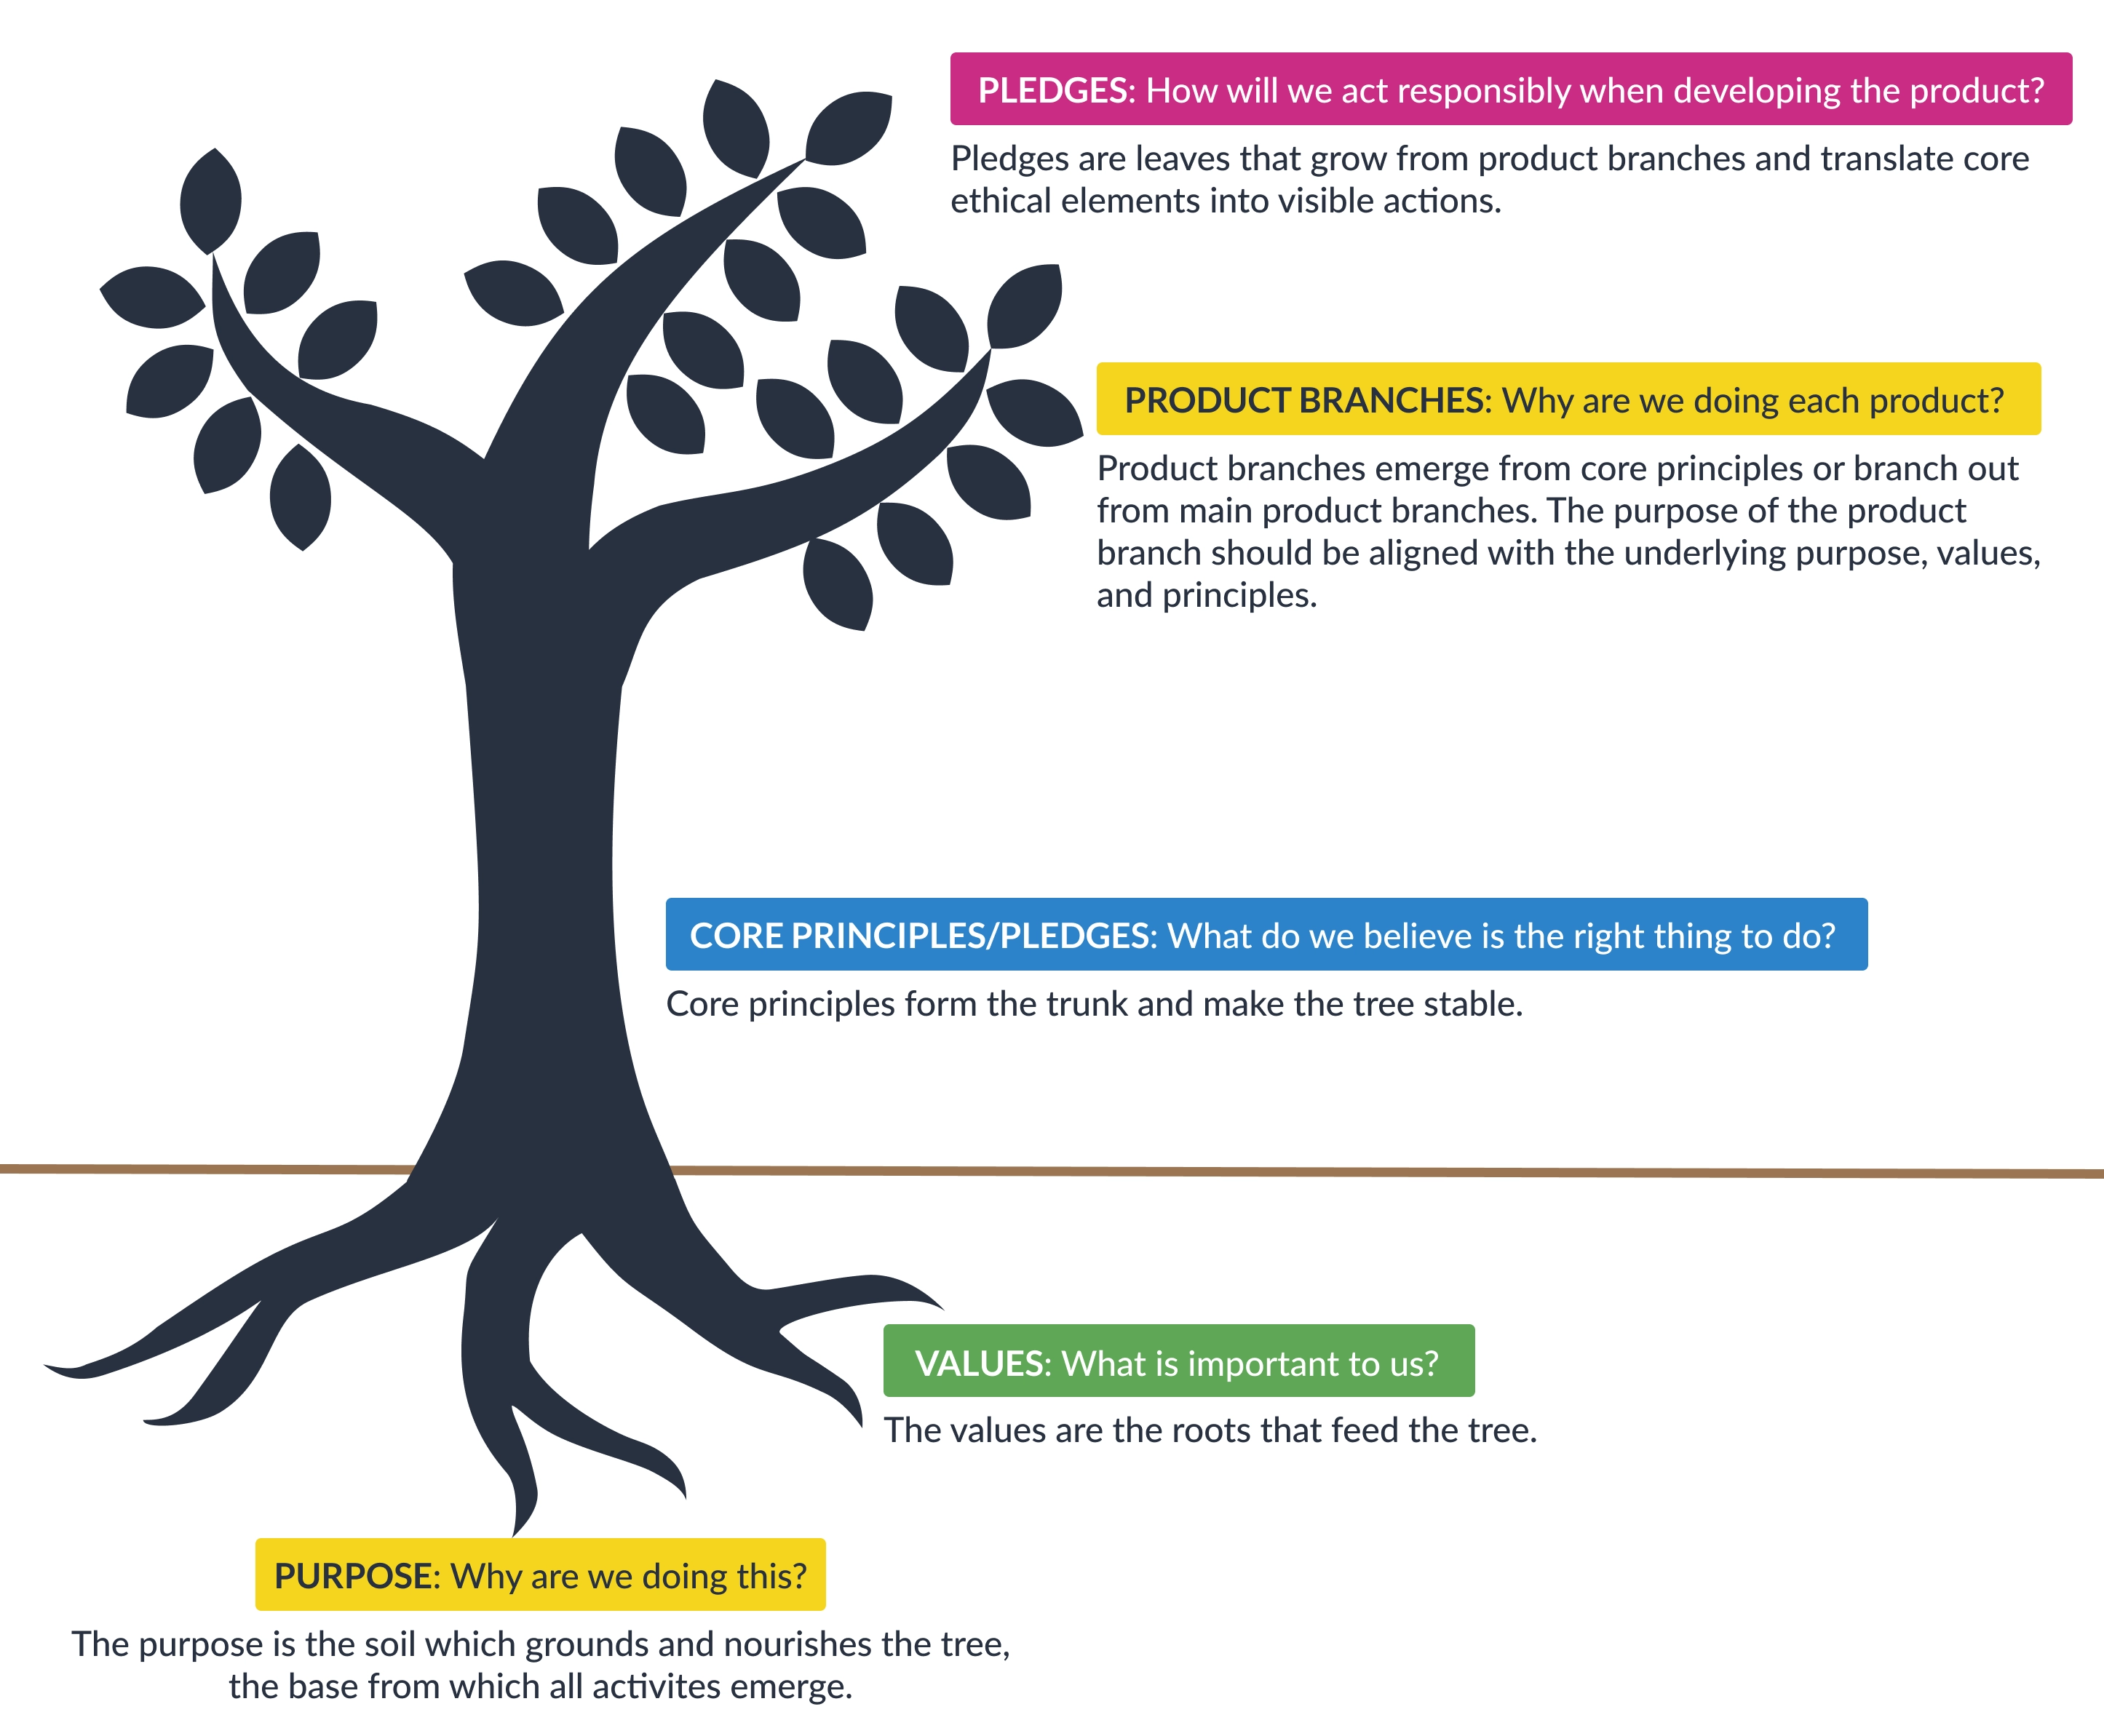 A graphic showing a tree with different ethical elements mapped to tree parts. Purpose is the soil in which the tree grows, values are the roots that feed the tree, the core principles form the trunk of the tree, product branches grown from the trunk, and pledges are the leaves that grow on individual product branches.